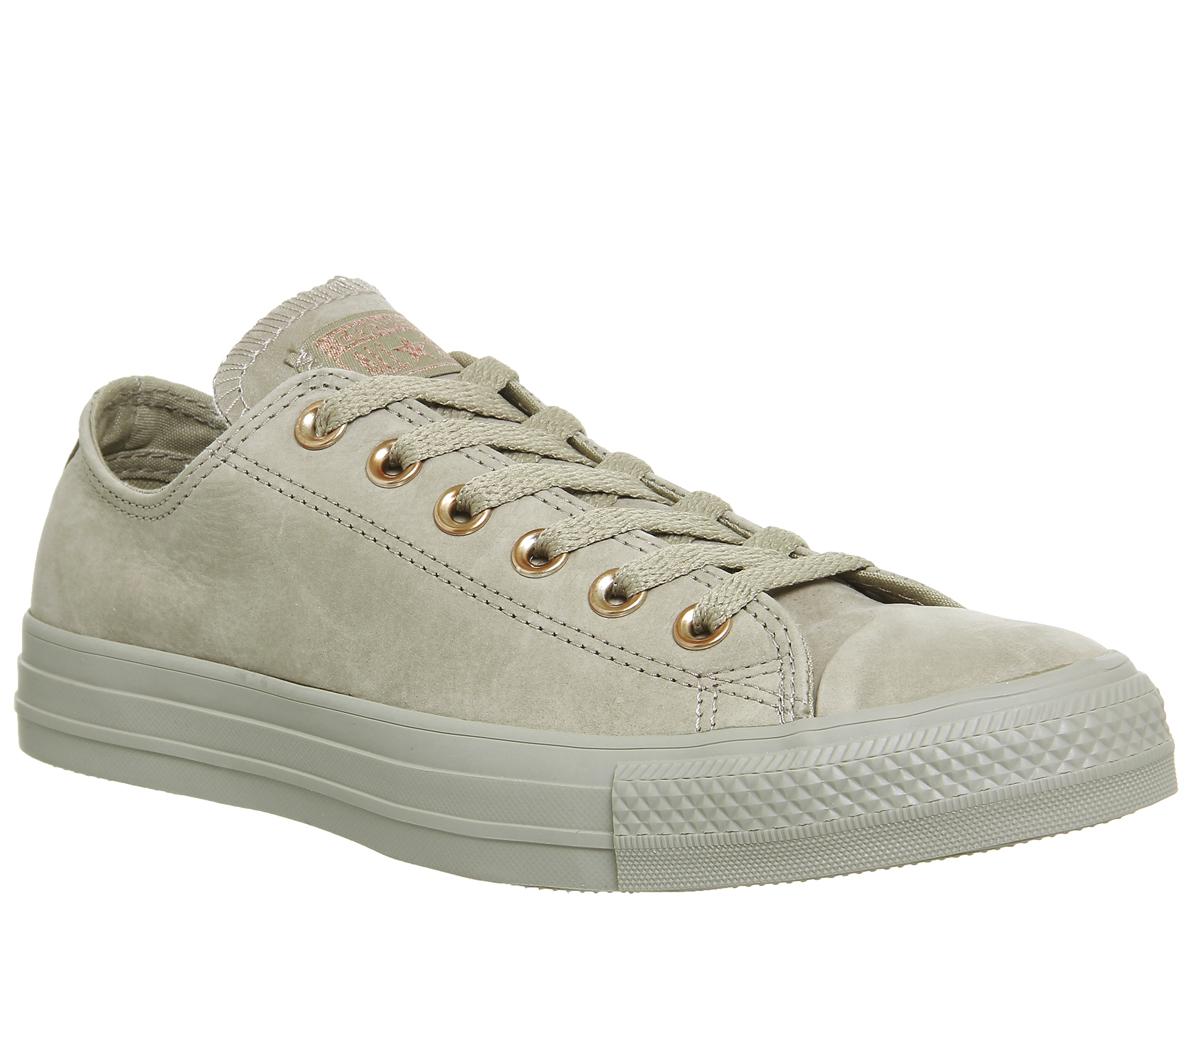 Converse All Star Low Leather Khaki Rose Gold Exclusive - Hers trainers